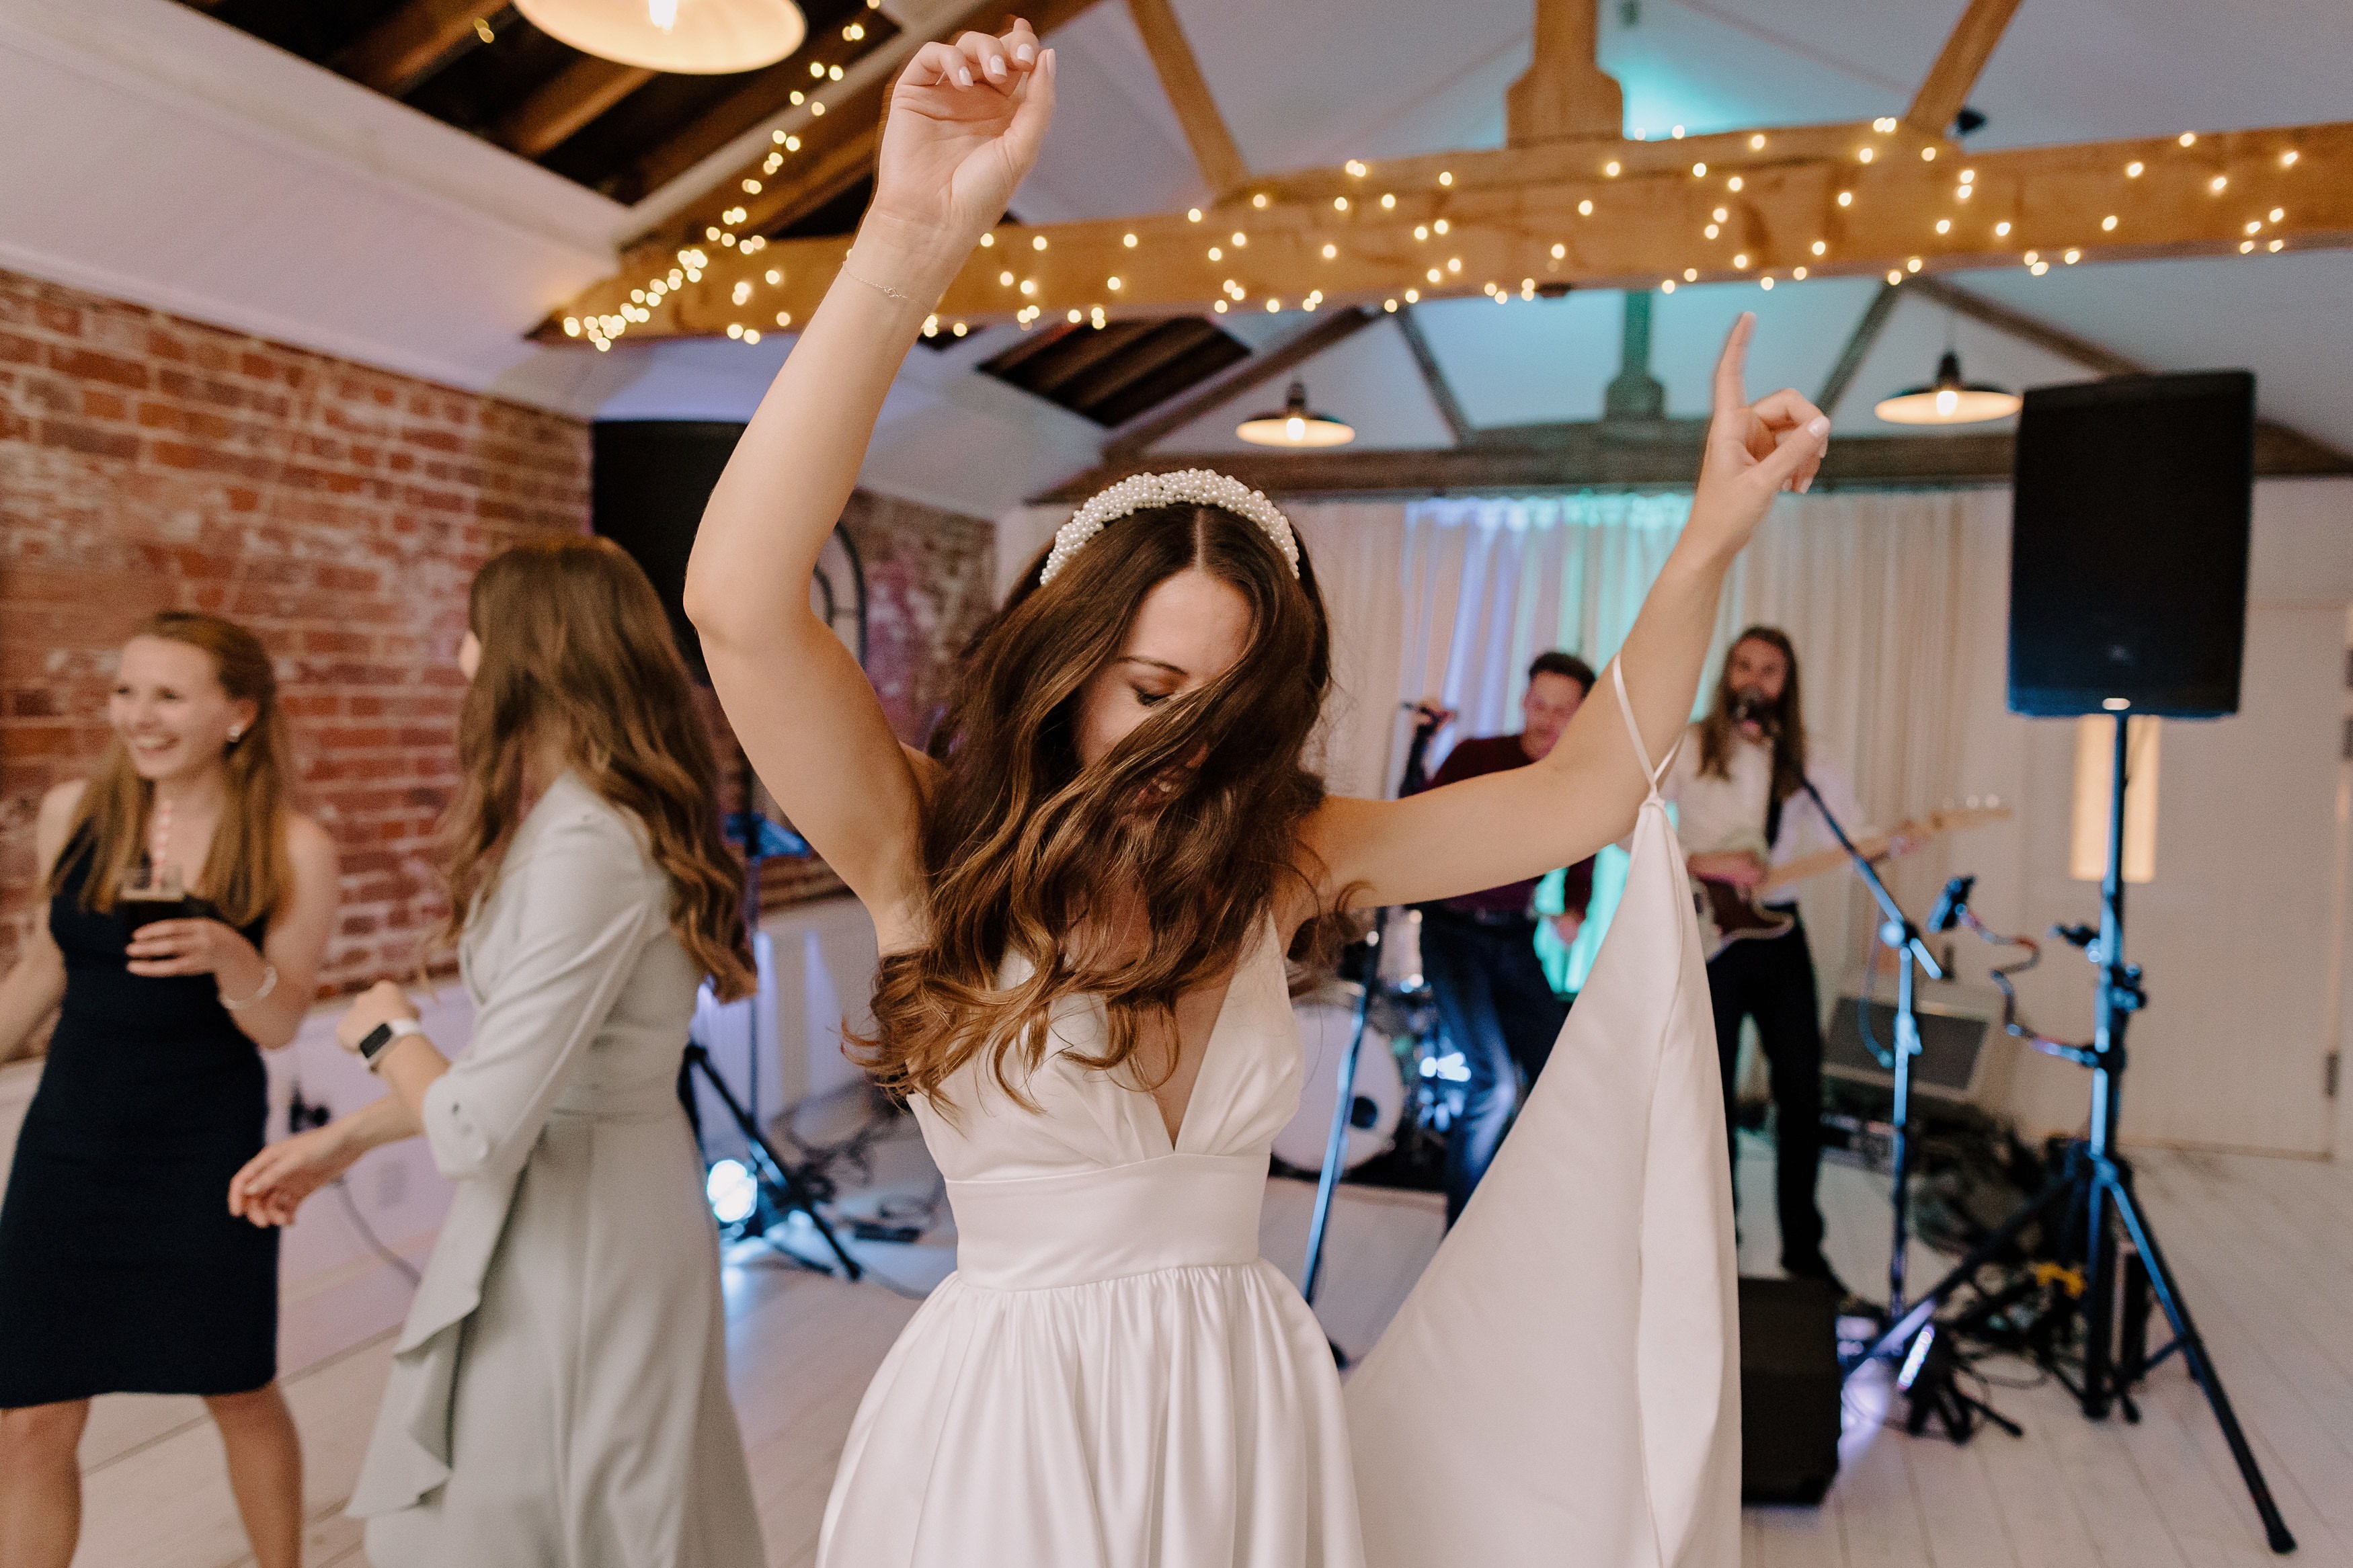 The bride dancing enthusiastically by herself